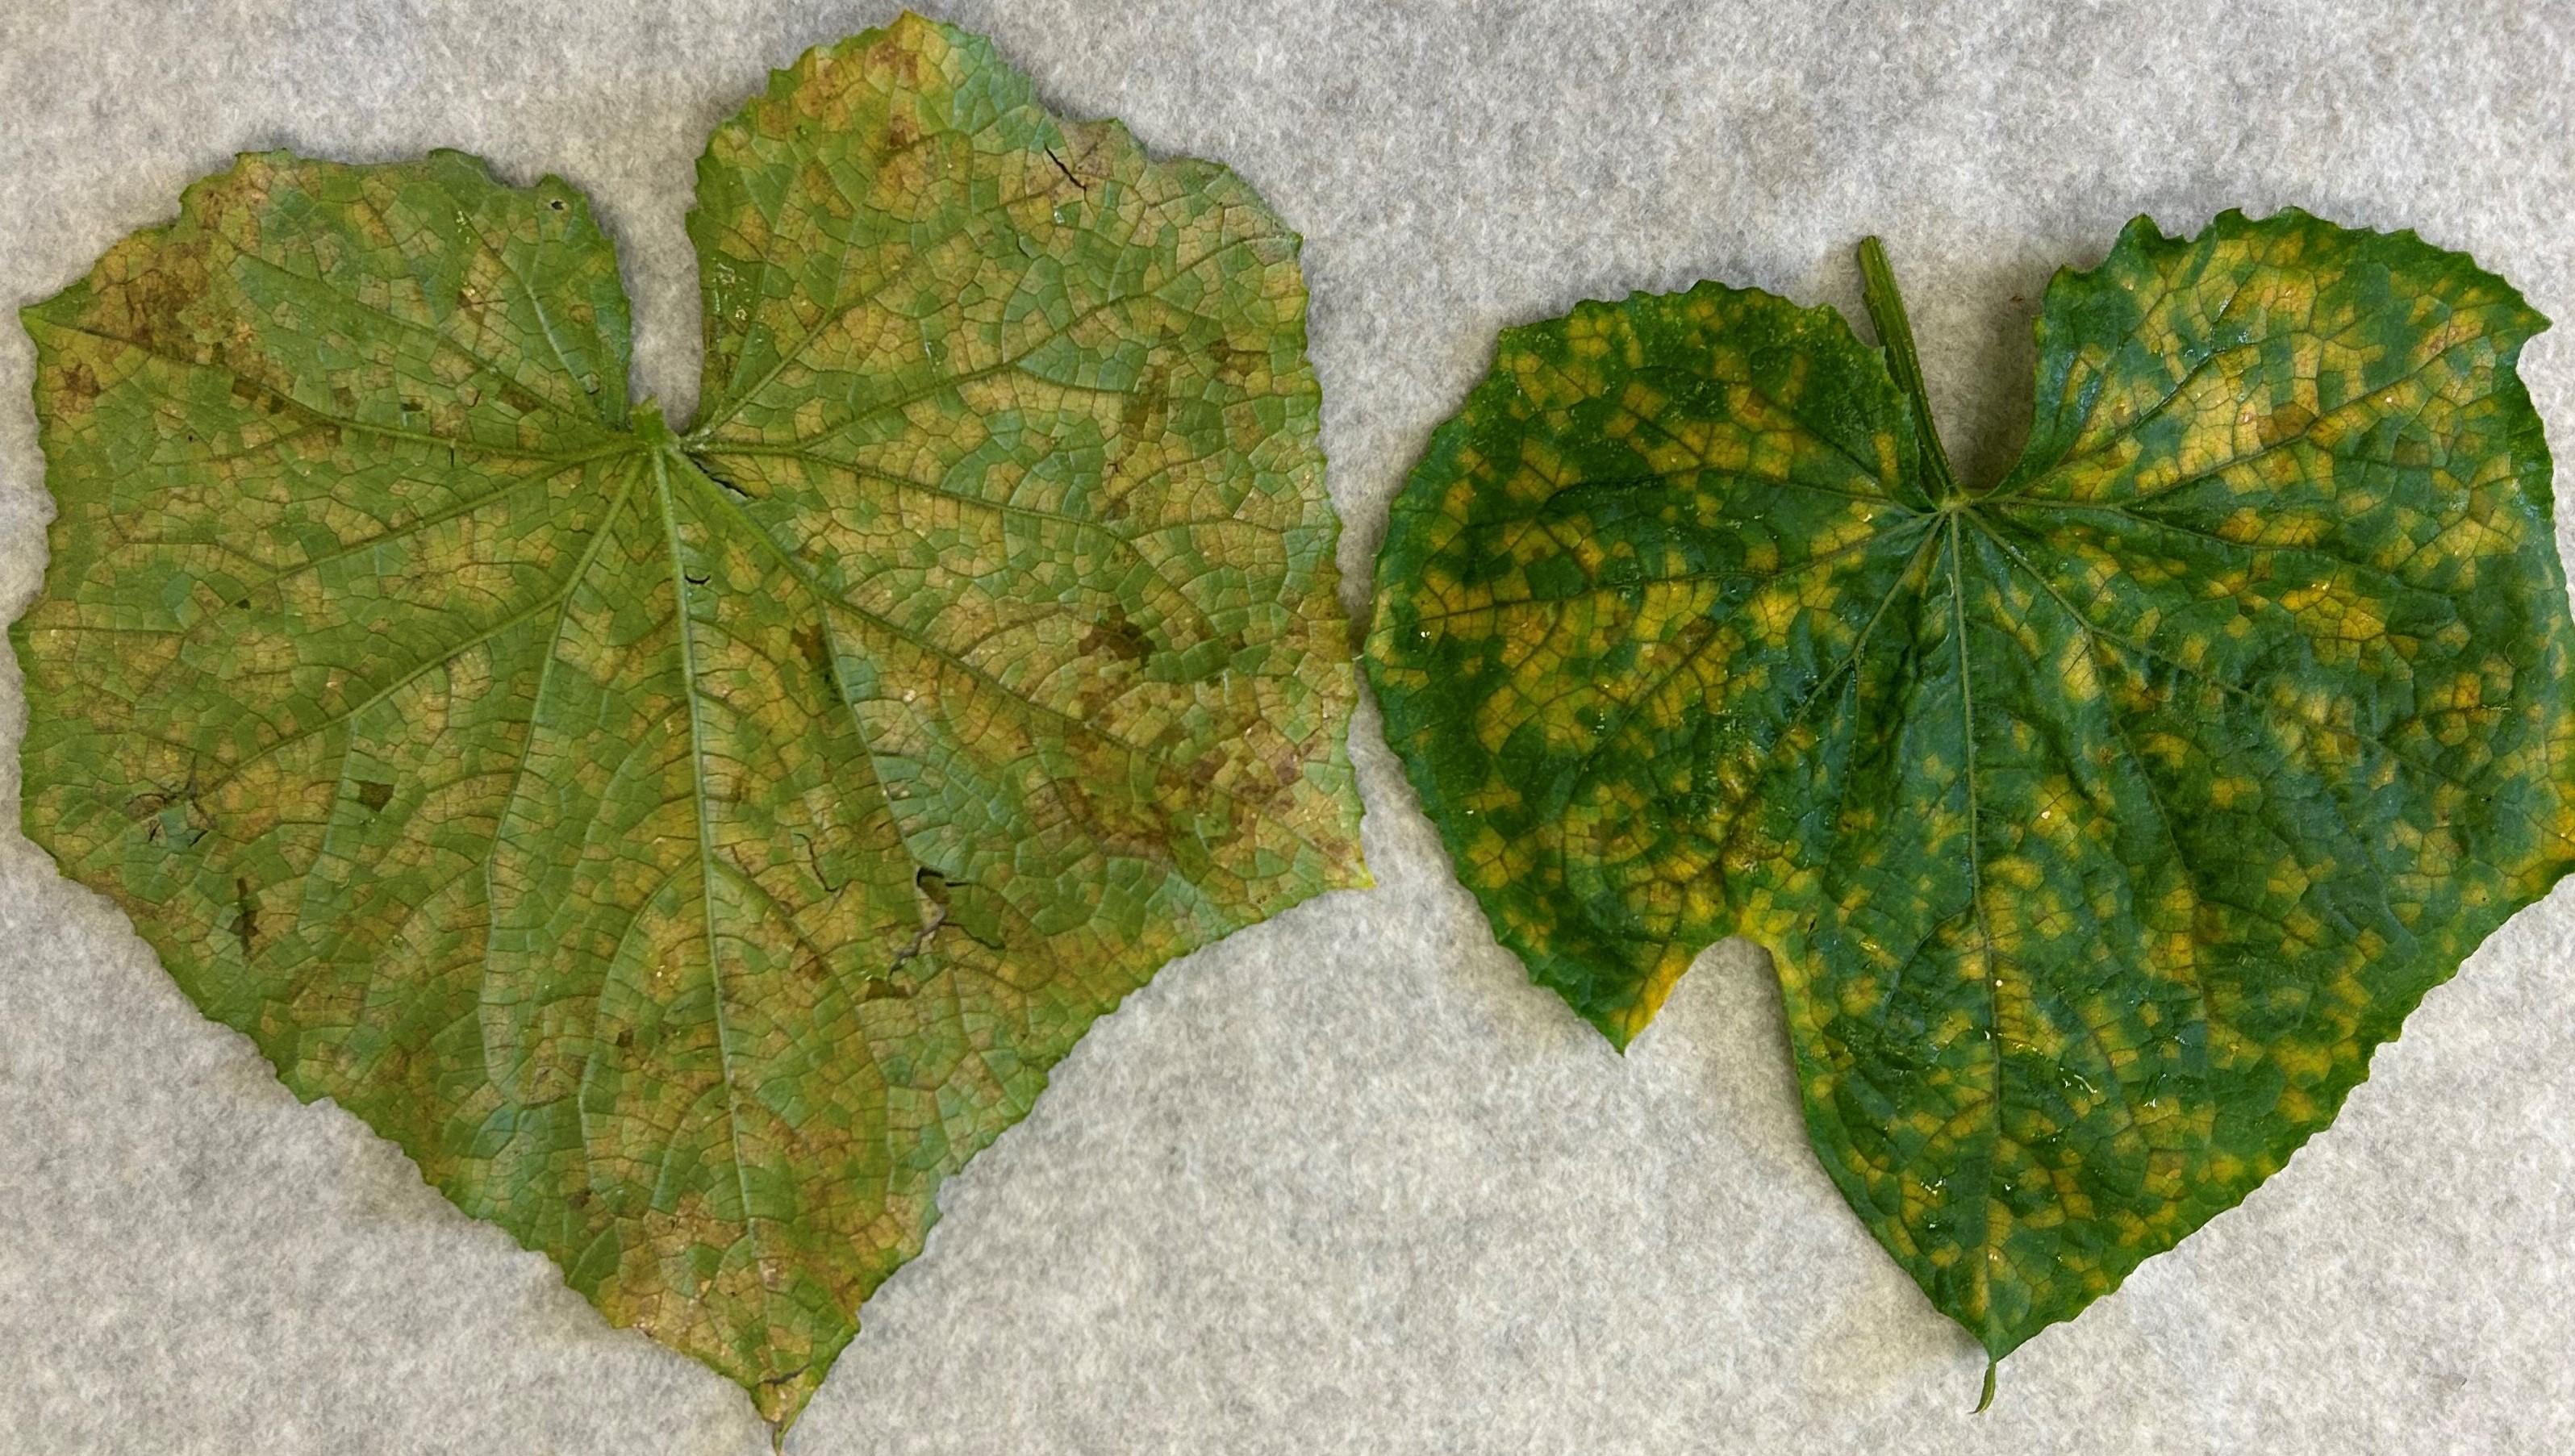 yellow and brown spots on cucumber leaves